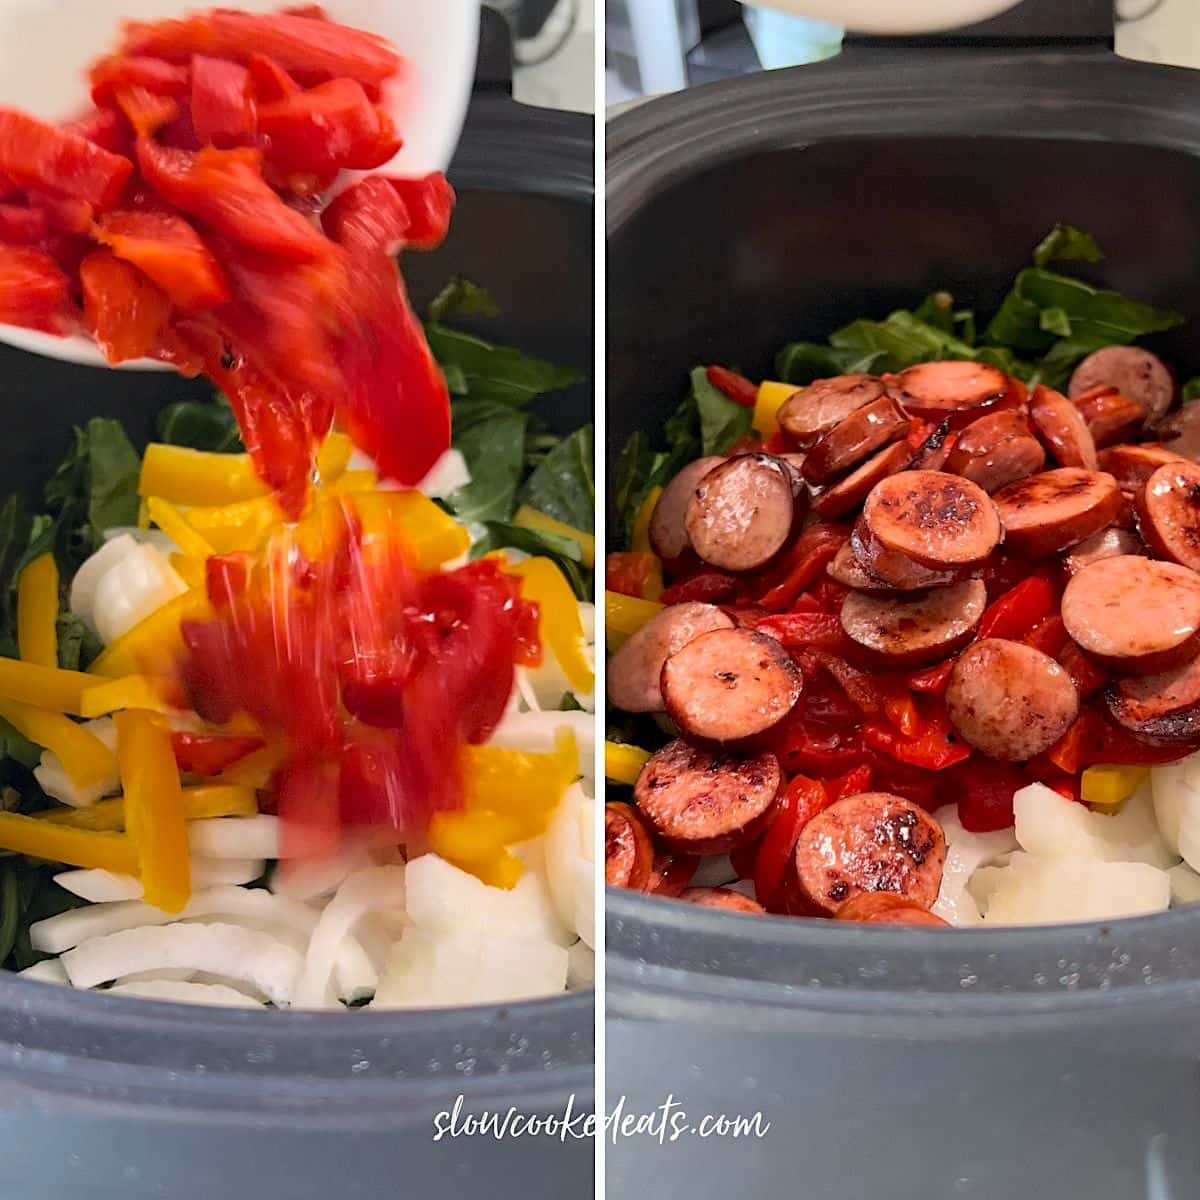 Adding the roasted red peppers and browned sausage to the crockpot.